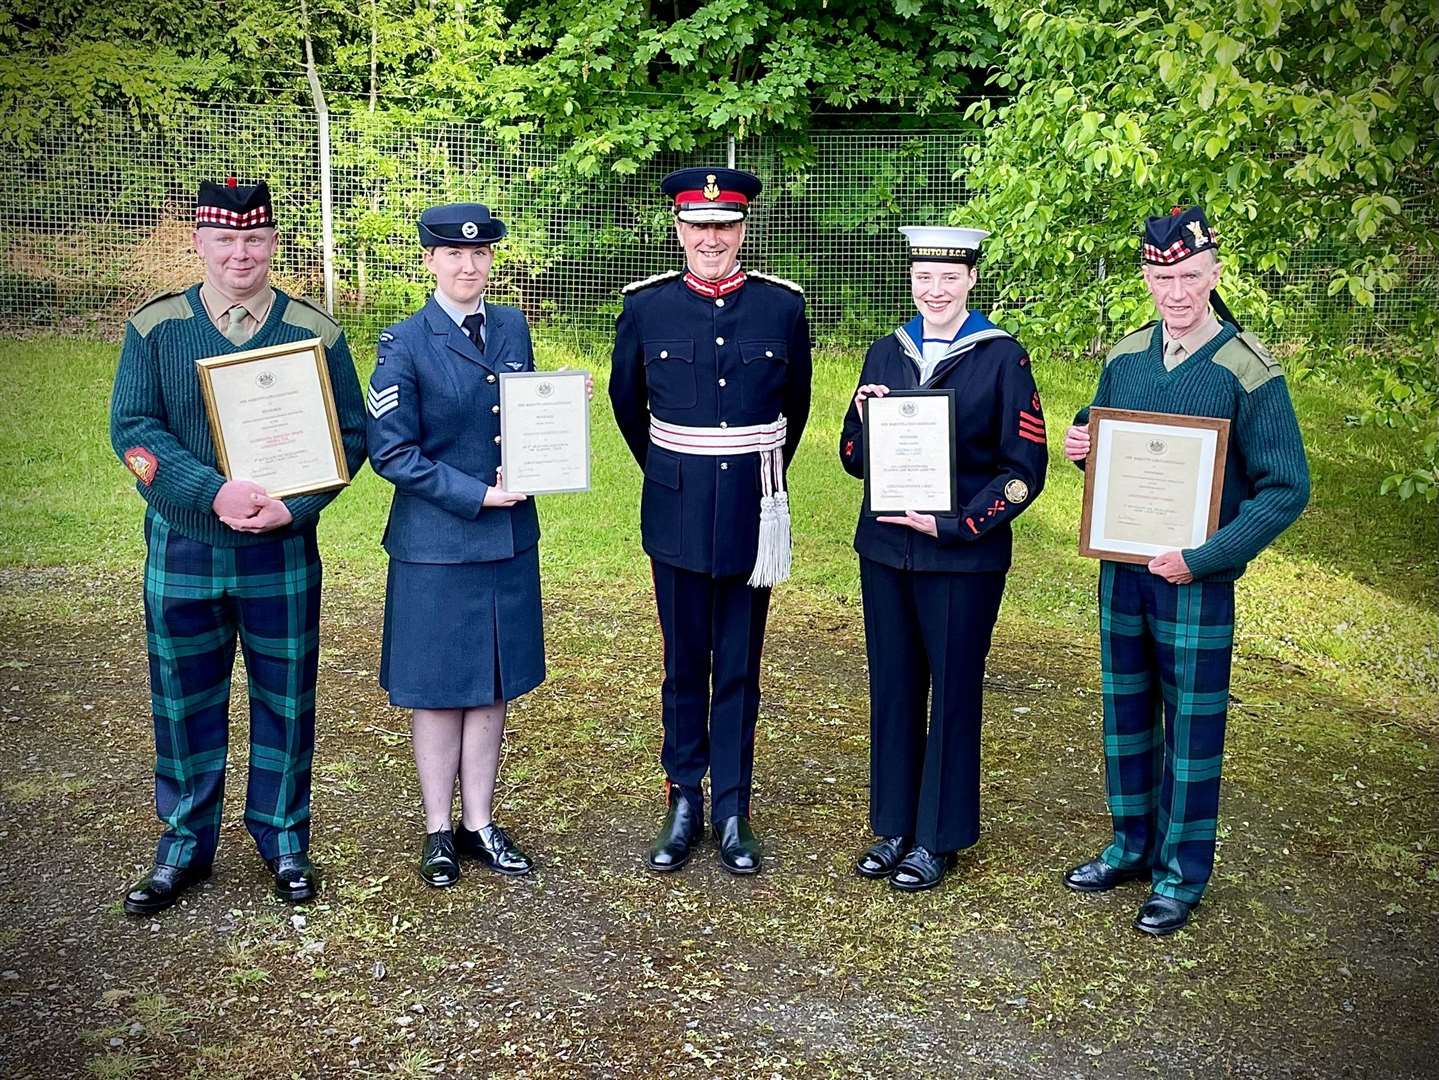 RSMI MacLeod (left) and Major Cassidy (right) with Certificates of Meritorious Service alongside Lord Lieutenant of Inverness-shire Mr James Wotherspoon